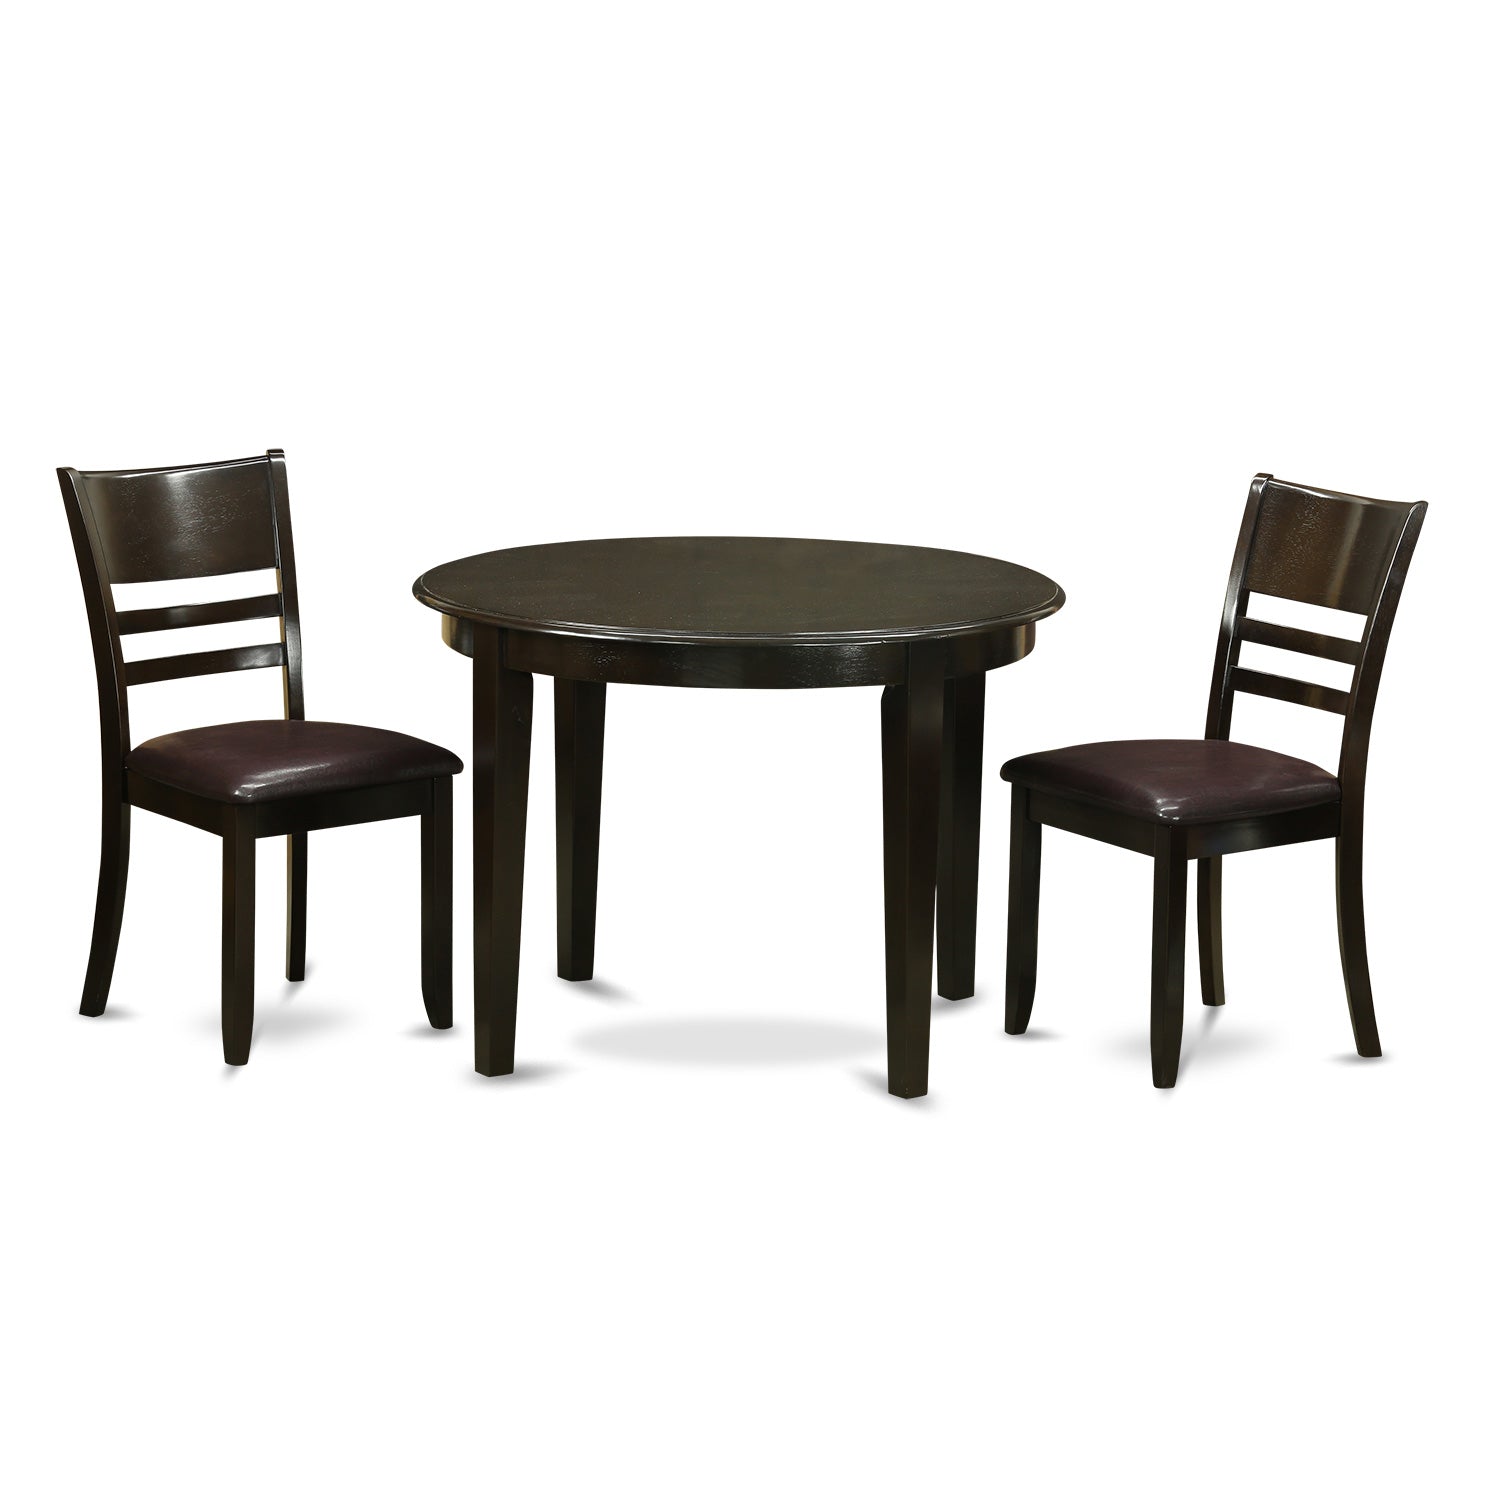 BOLY3-CAP-LC 3 PC Kitchen Table set-Small Table and 2 Kitchen Chairs